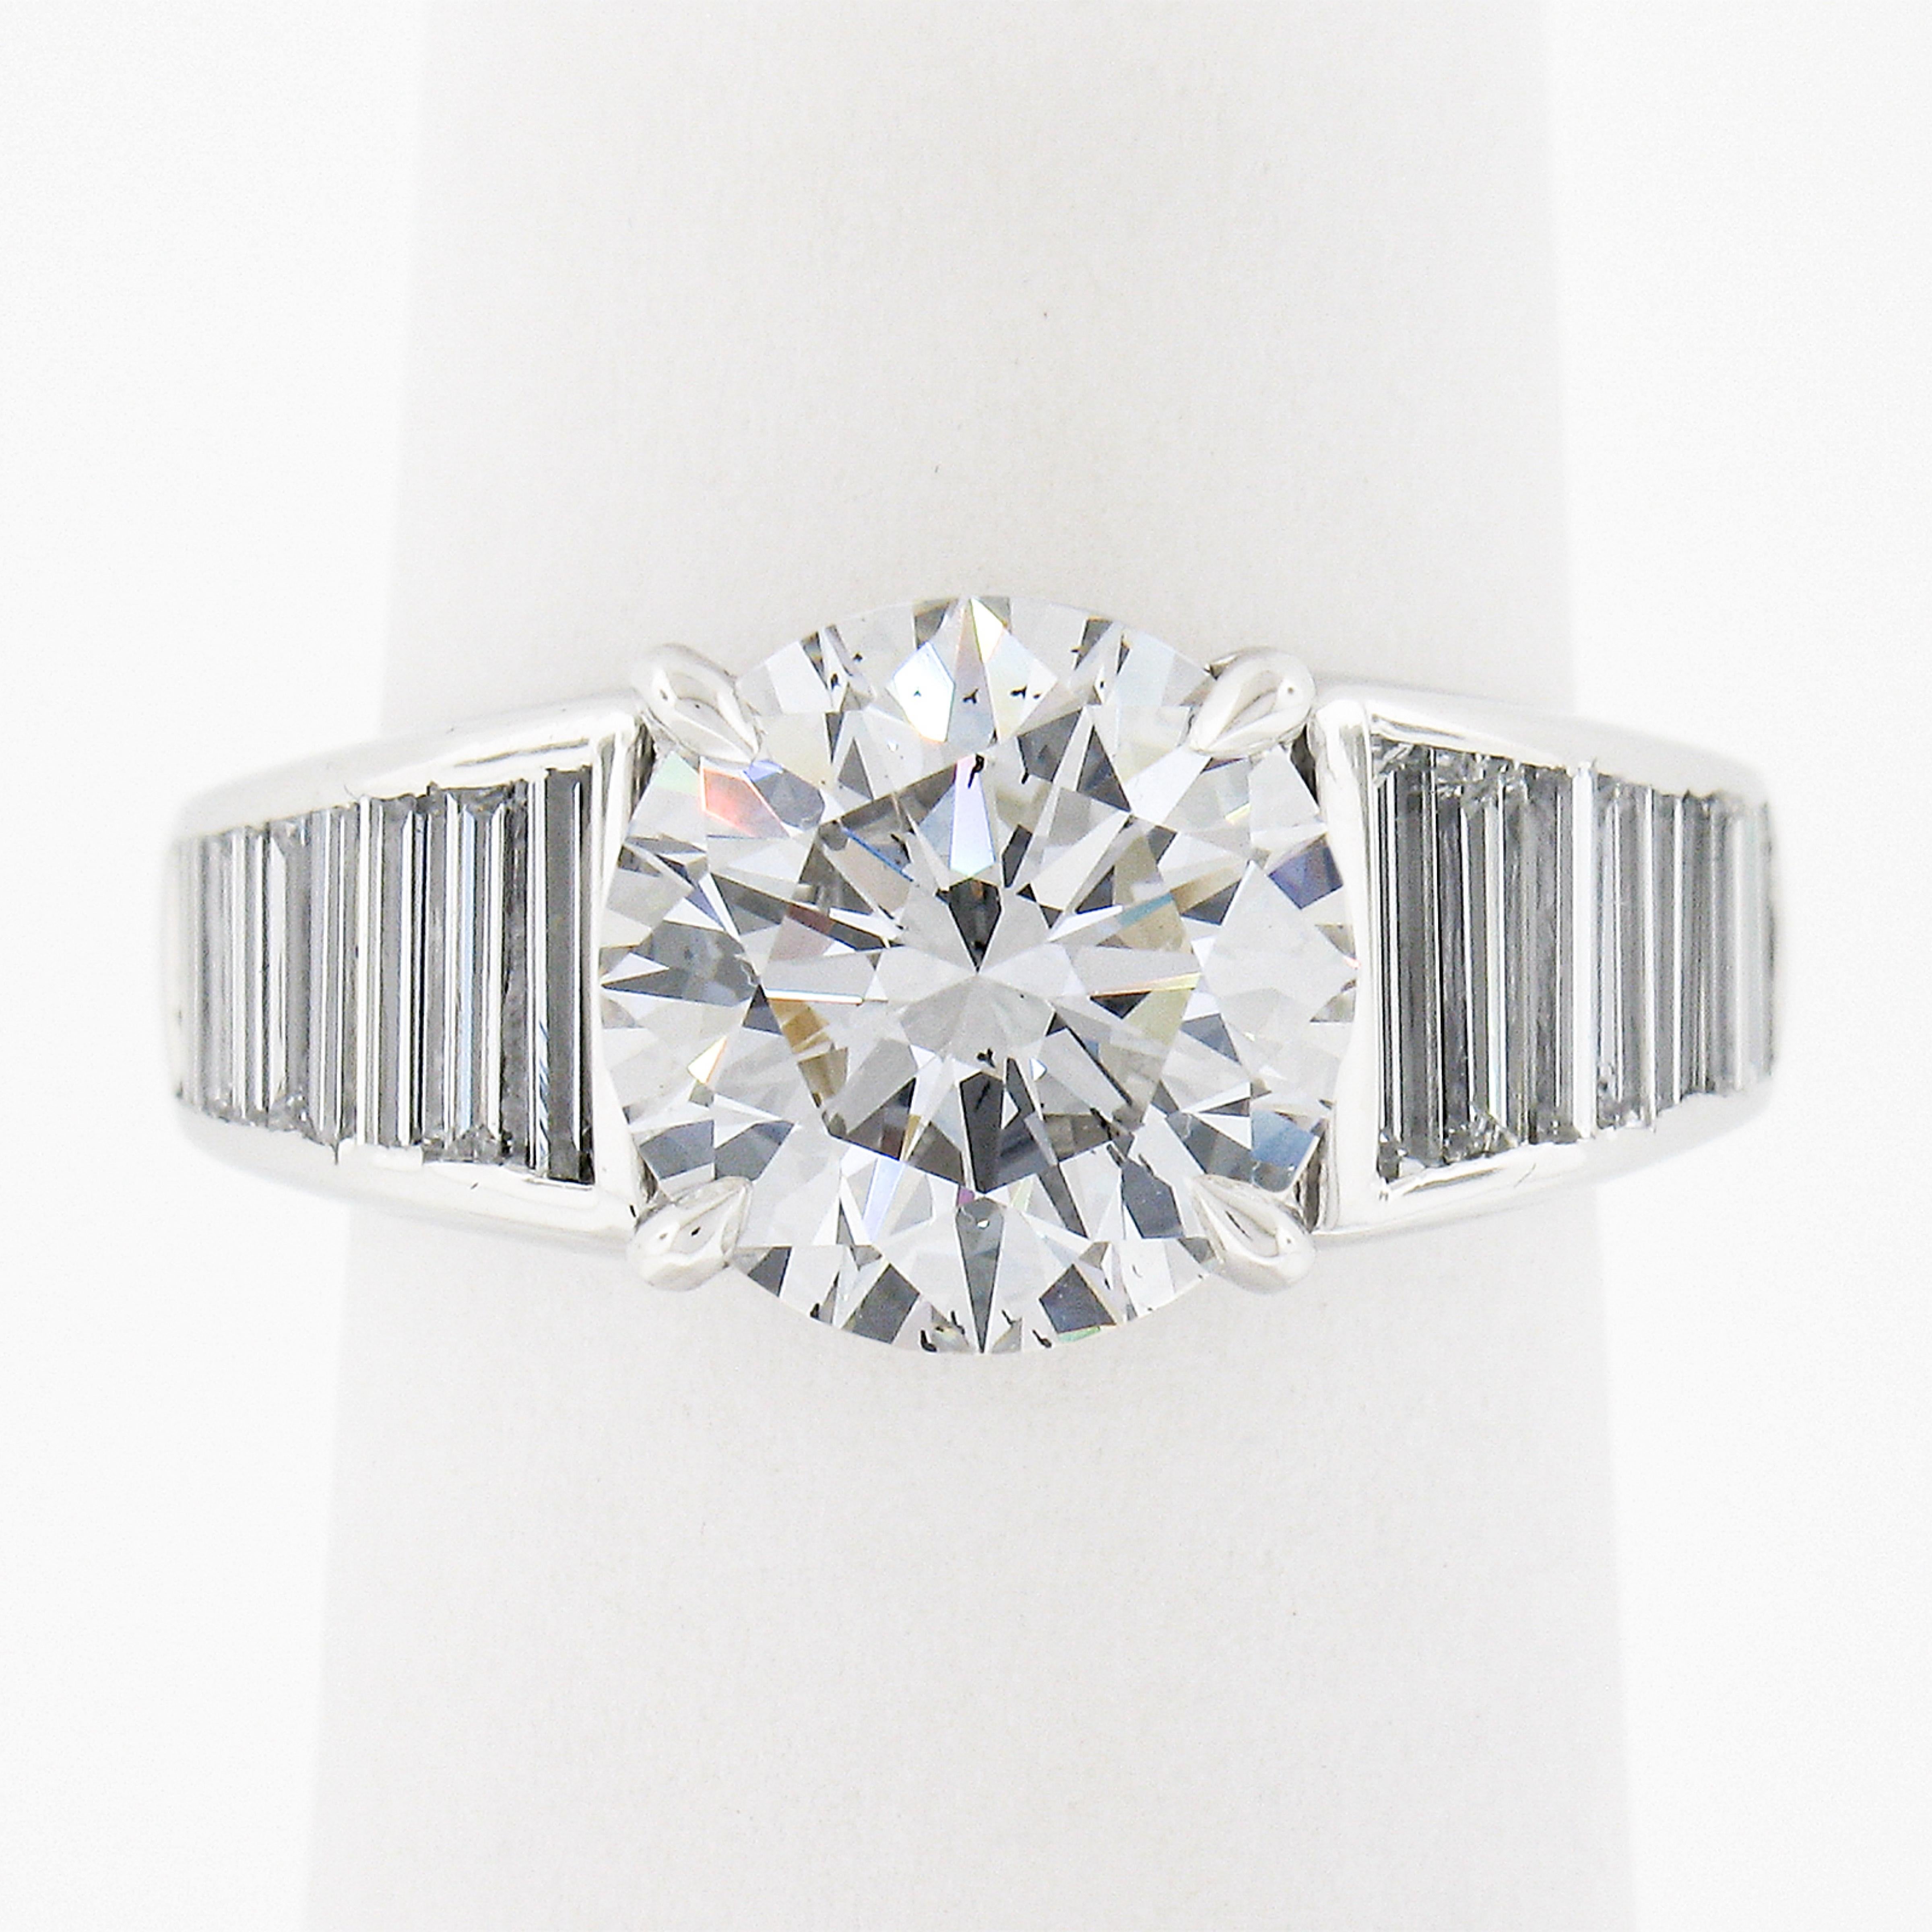 This ring features a GIA certified top quality 3.17ct center round brilliant diamond. The diamond has an Ideal Cut and an incredible white G color along with a 100% eye clean SI1 clarity. Such a diamond deserves a setting that is just as fabulous.